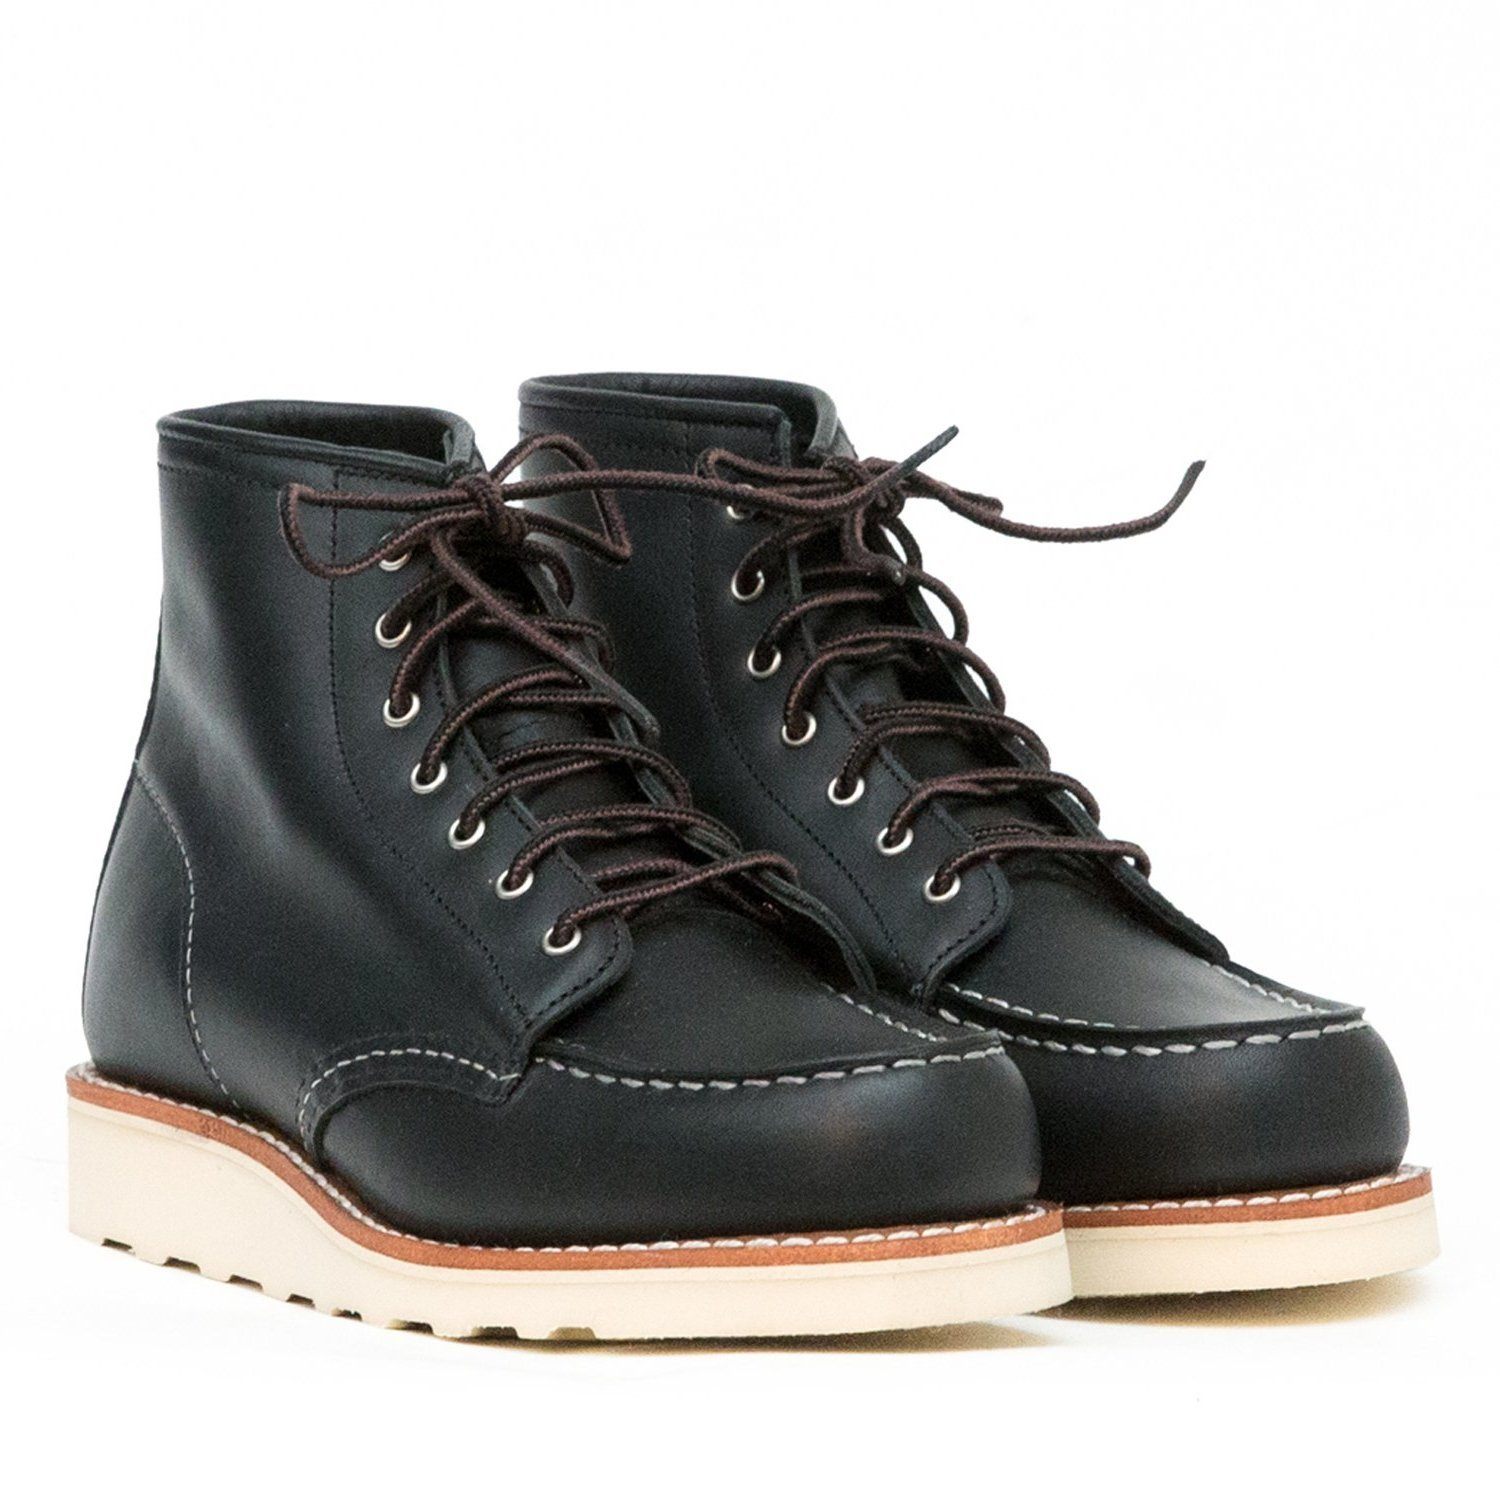 RED WING - 3373 Moc Toe - black boundary Scarpe Donna Red Wing Shoes 